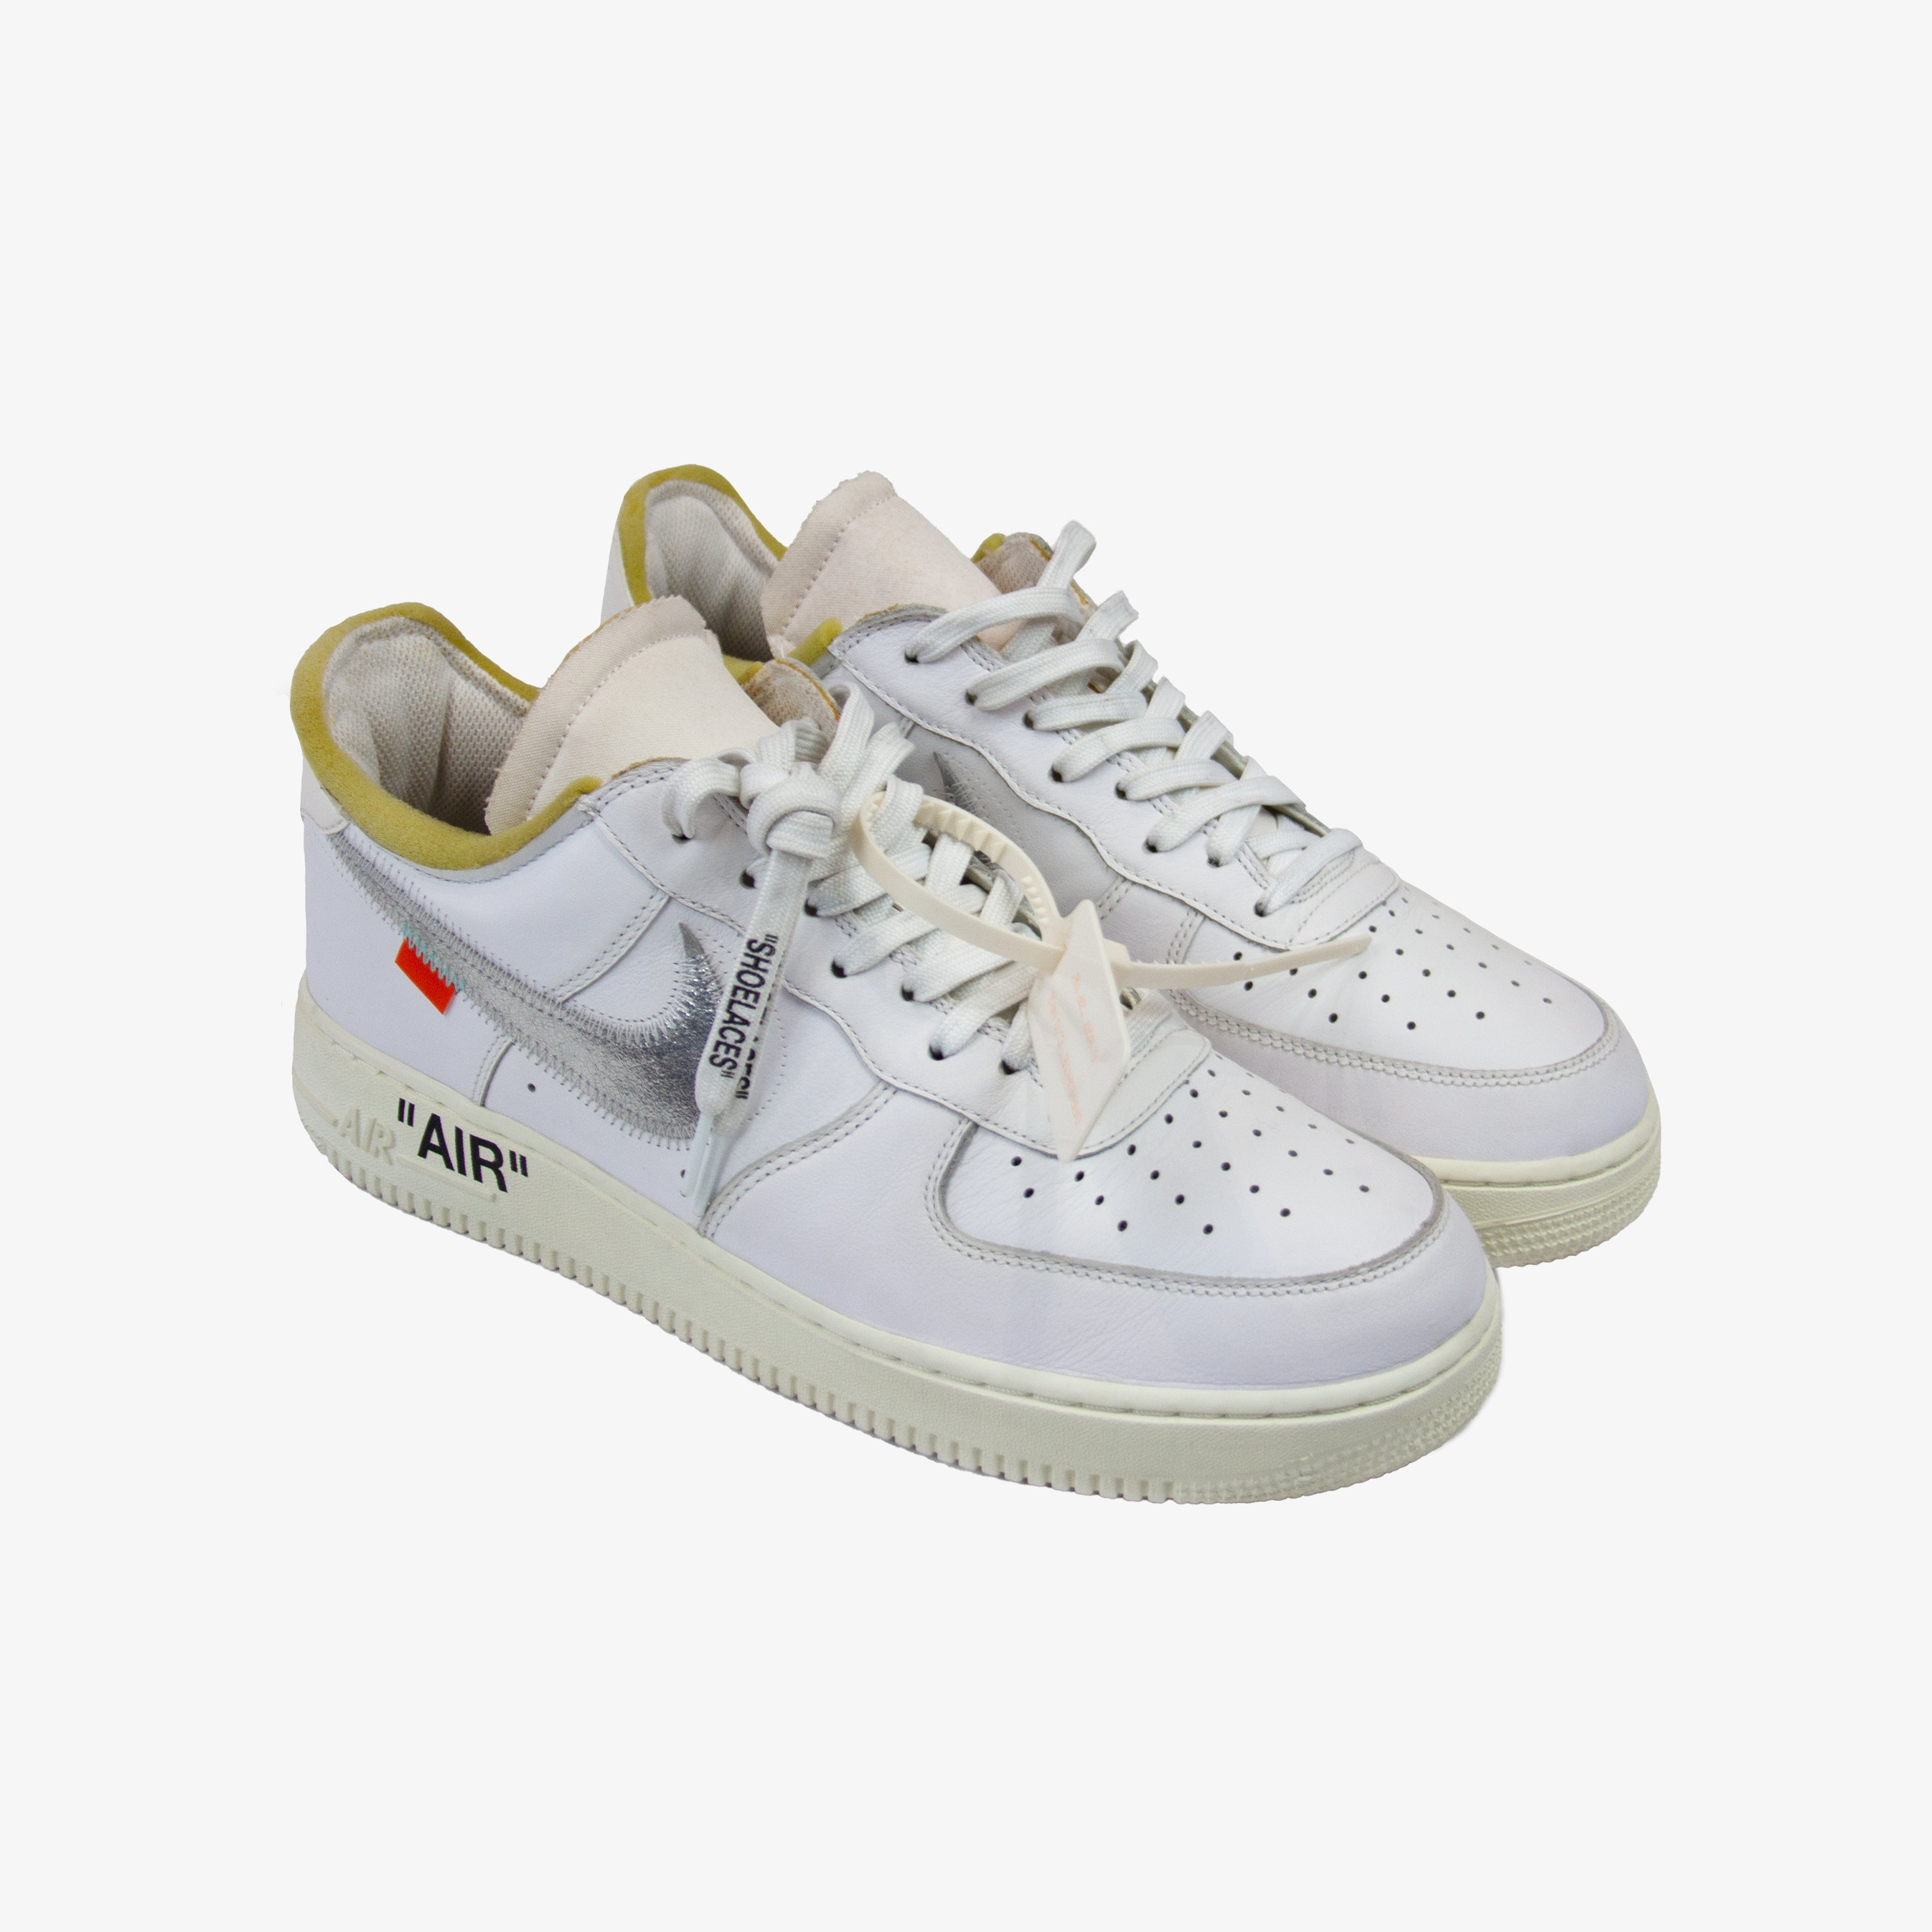 NIKE OFF WHITE AF1 Complexcon Air Force 1 Size 8.5 $4,000.00 - PicClick